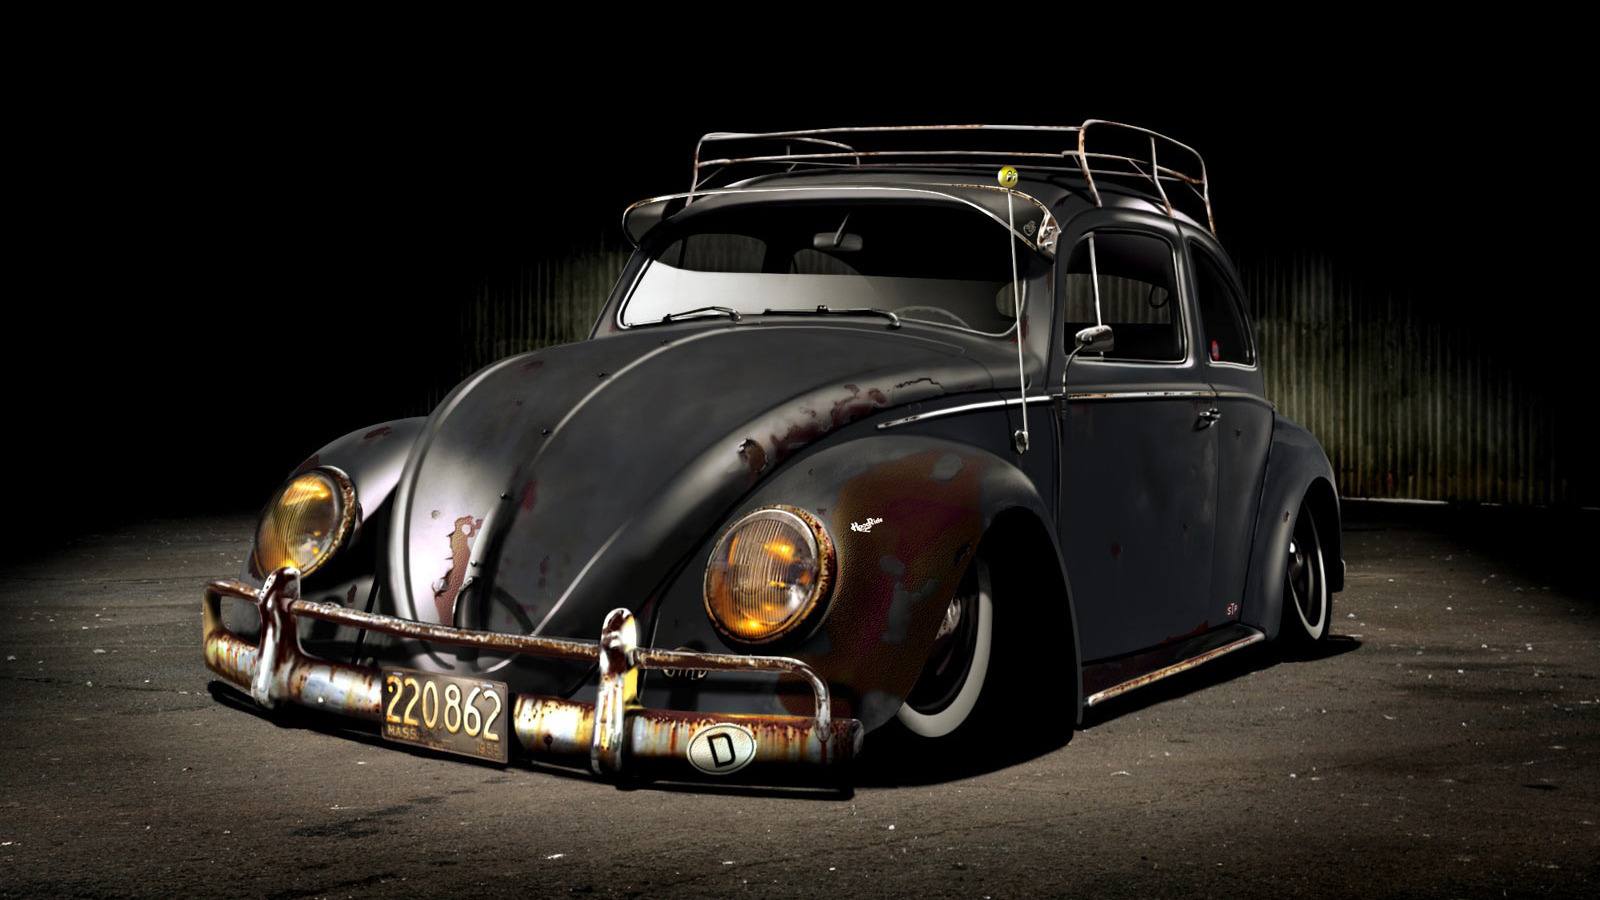  Wallpapers on Old Cars Bug Vehicles Rat Rod Car Beatle Hd Wallpaper   Insects   Bugs